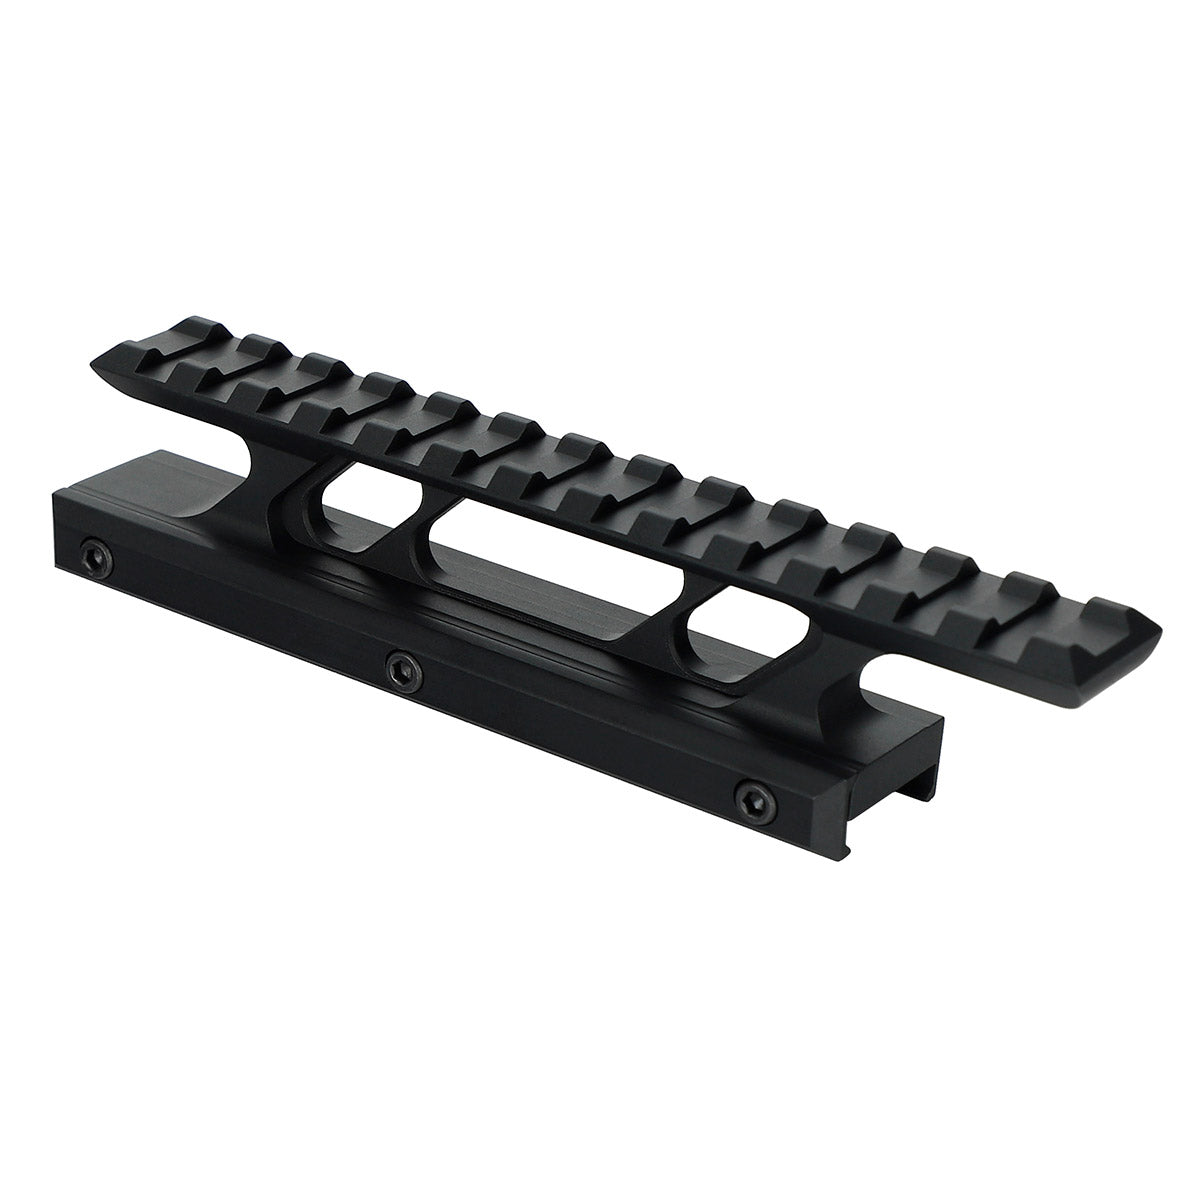 ohhunt 11mm Dovetail to Picatinny Rail Adapter Mount Low Profile